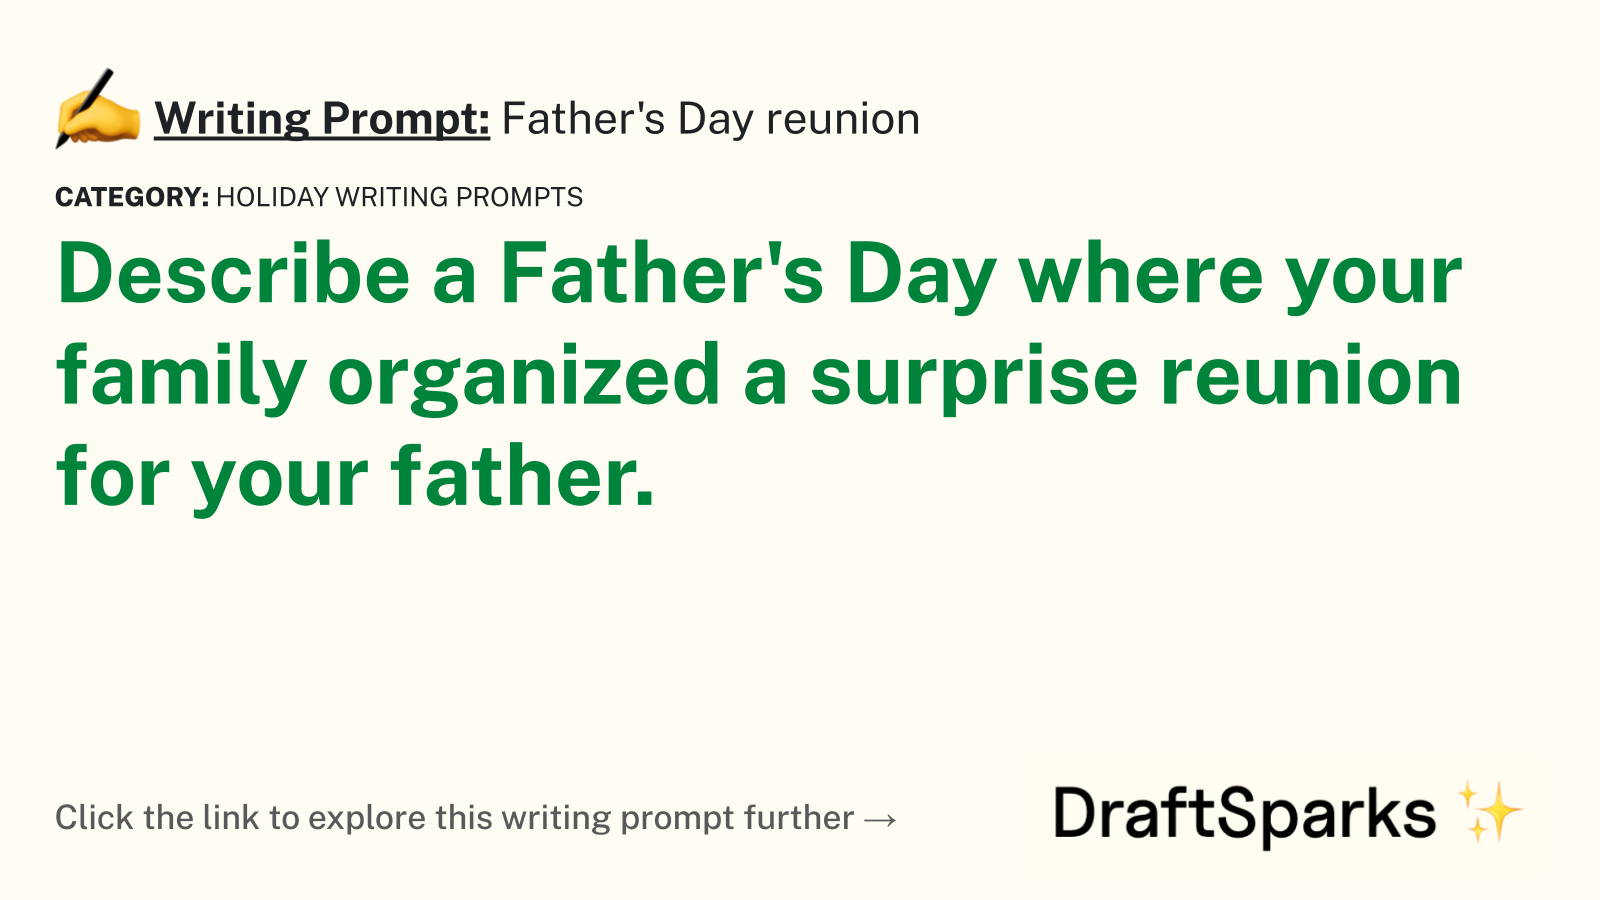 Father’s Day reunion